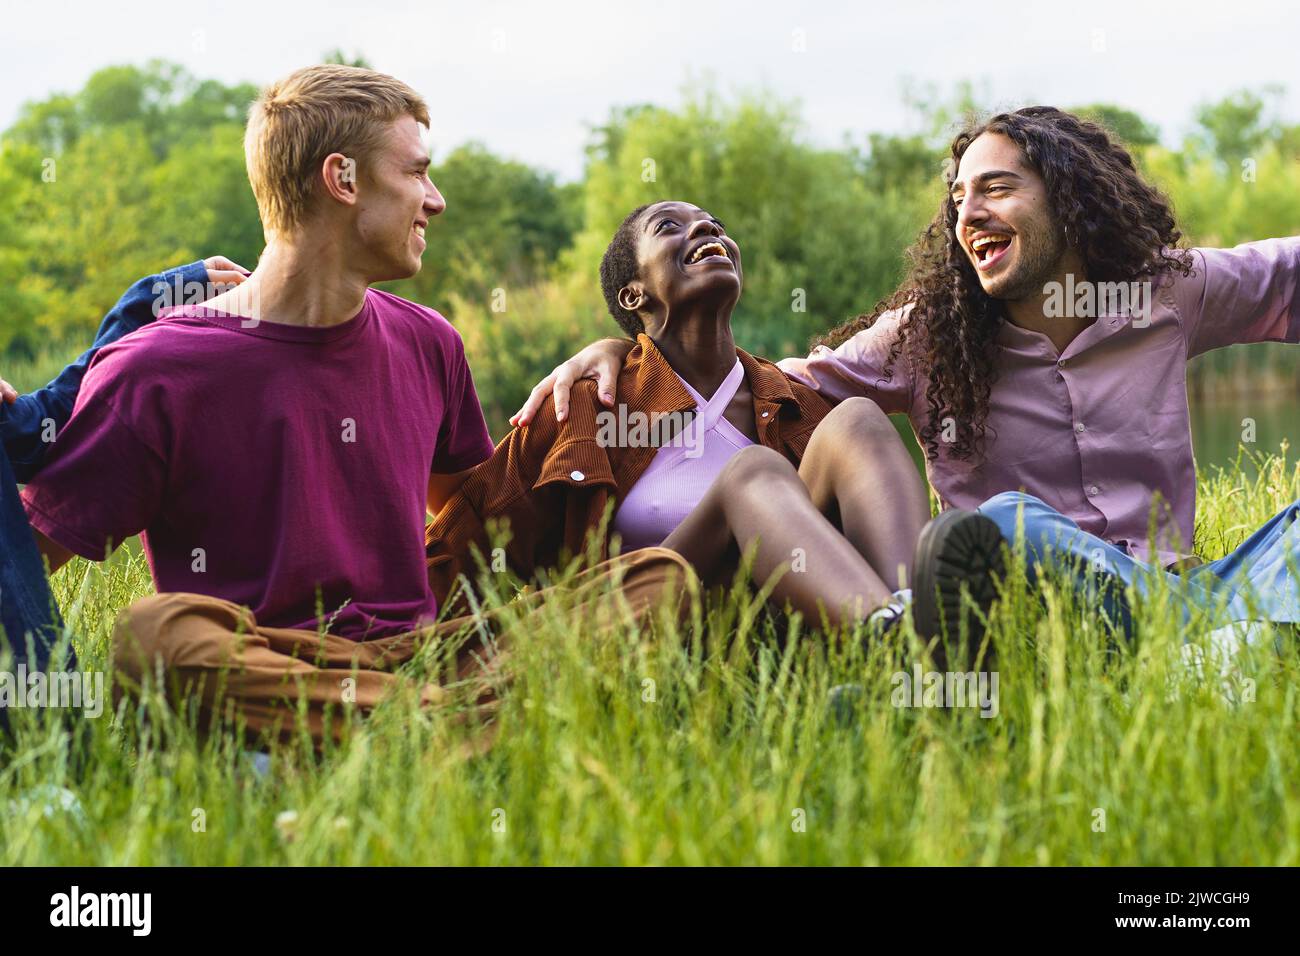 Cheerful multiethnic friends bonding and having fun hugging and laughing on the grass having fun together - Group of cheerful multiracial gen z young Stock Photo